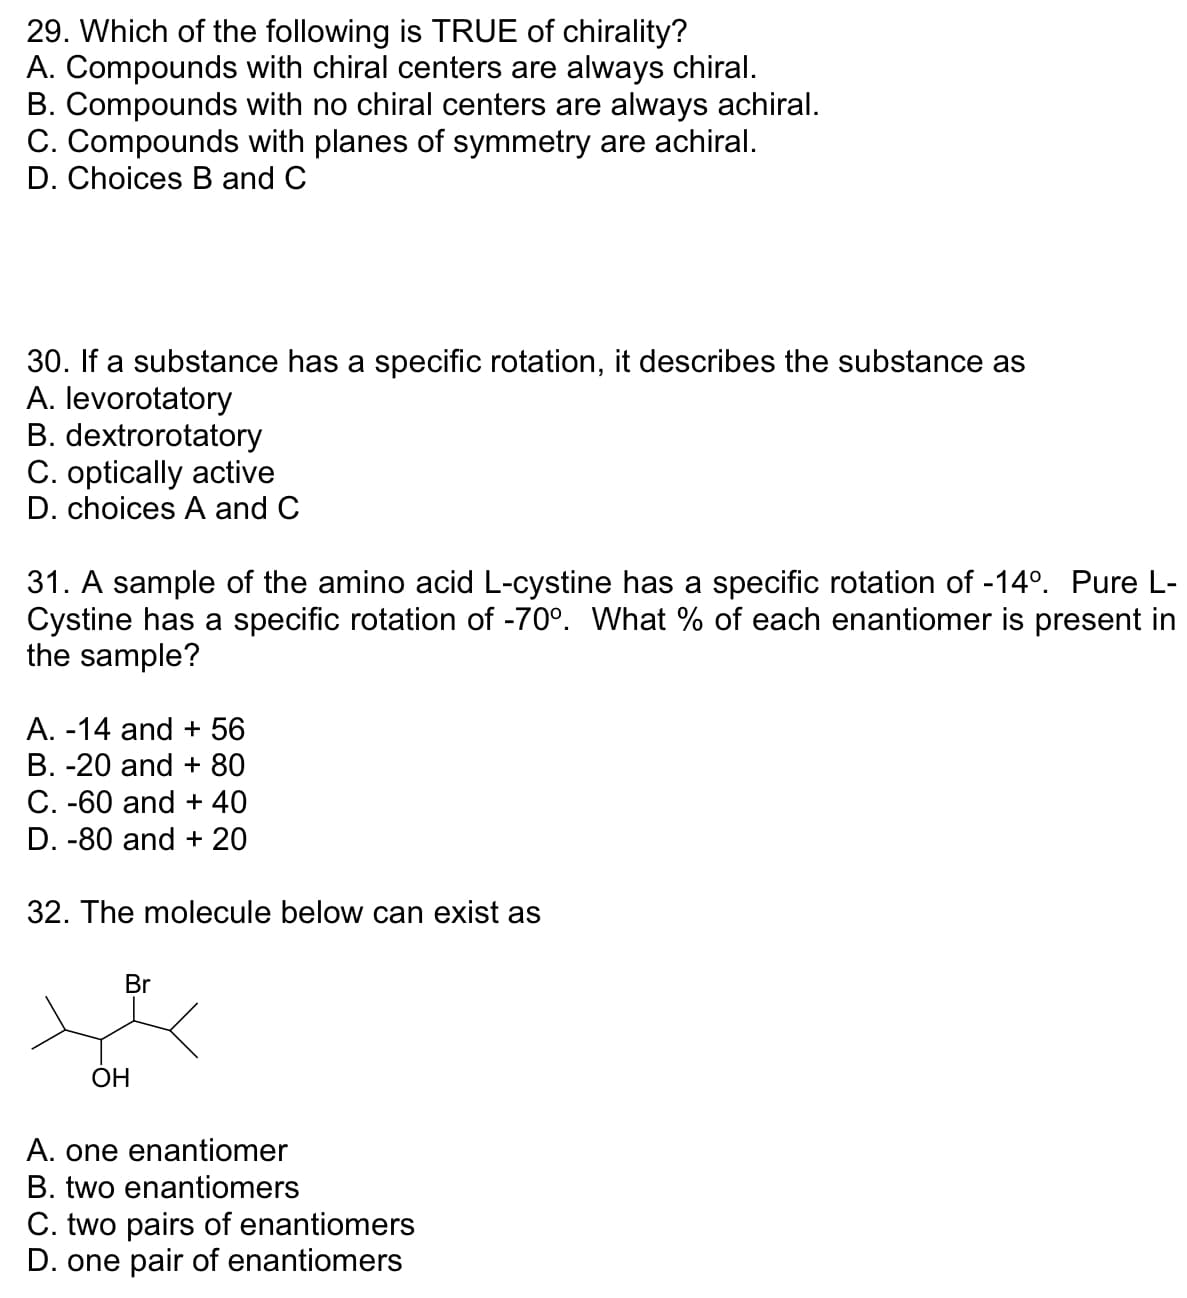 29. Which of the following is TRUE of chirality?
A. Compounds with chiral centers are always chiral.
B. Compounds with no chiral centers are always achiral.
C. Compounds with planes of symmetry are achiral.
D. Choices B and C
30. If a substance has a specific rotation, it describes the substance as
A. levorotatory
B. dextrorotatory
C. optically active
D. choices A and C
31. A sample of the amino acid L-cystine has a specific rotation of -14°. Pure L-
Cystine has a specific rotation of -70°. What % of each enantiomer is present in
the sample?
A. -14 and + 56
B. -20 and + 80
C. -60 and + 40
D. -80 and + 20
32. The molecule below can exist as
Br
OH
A. one enantiomer
B. two enantiomers
C. two pairs of enantiomers
D. one pair of enantiomers